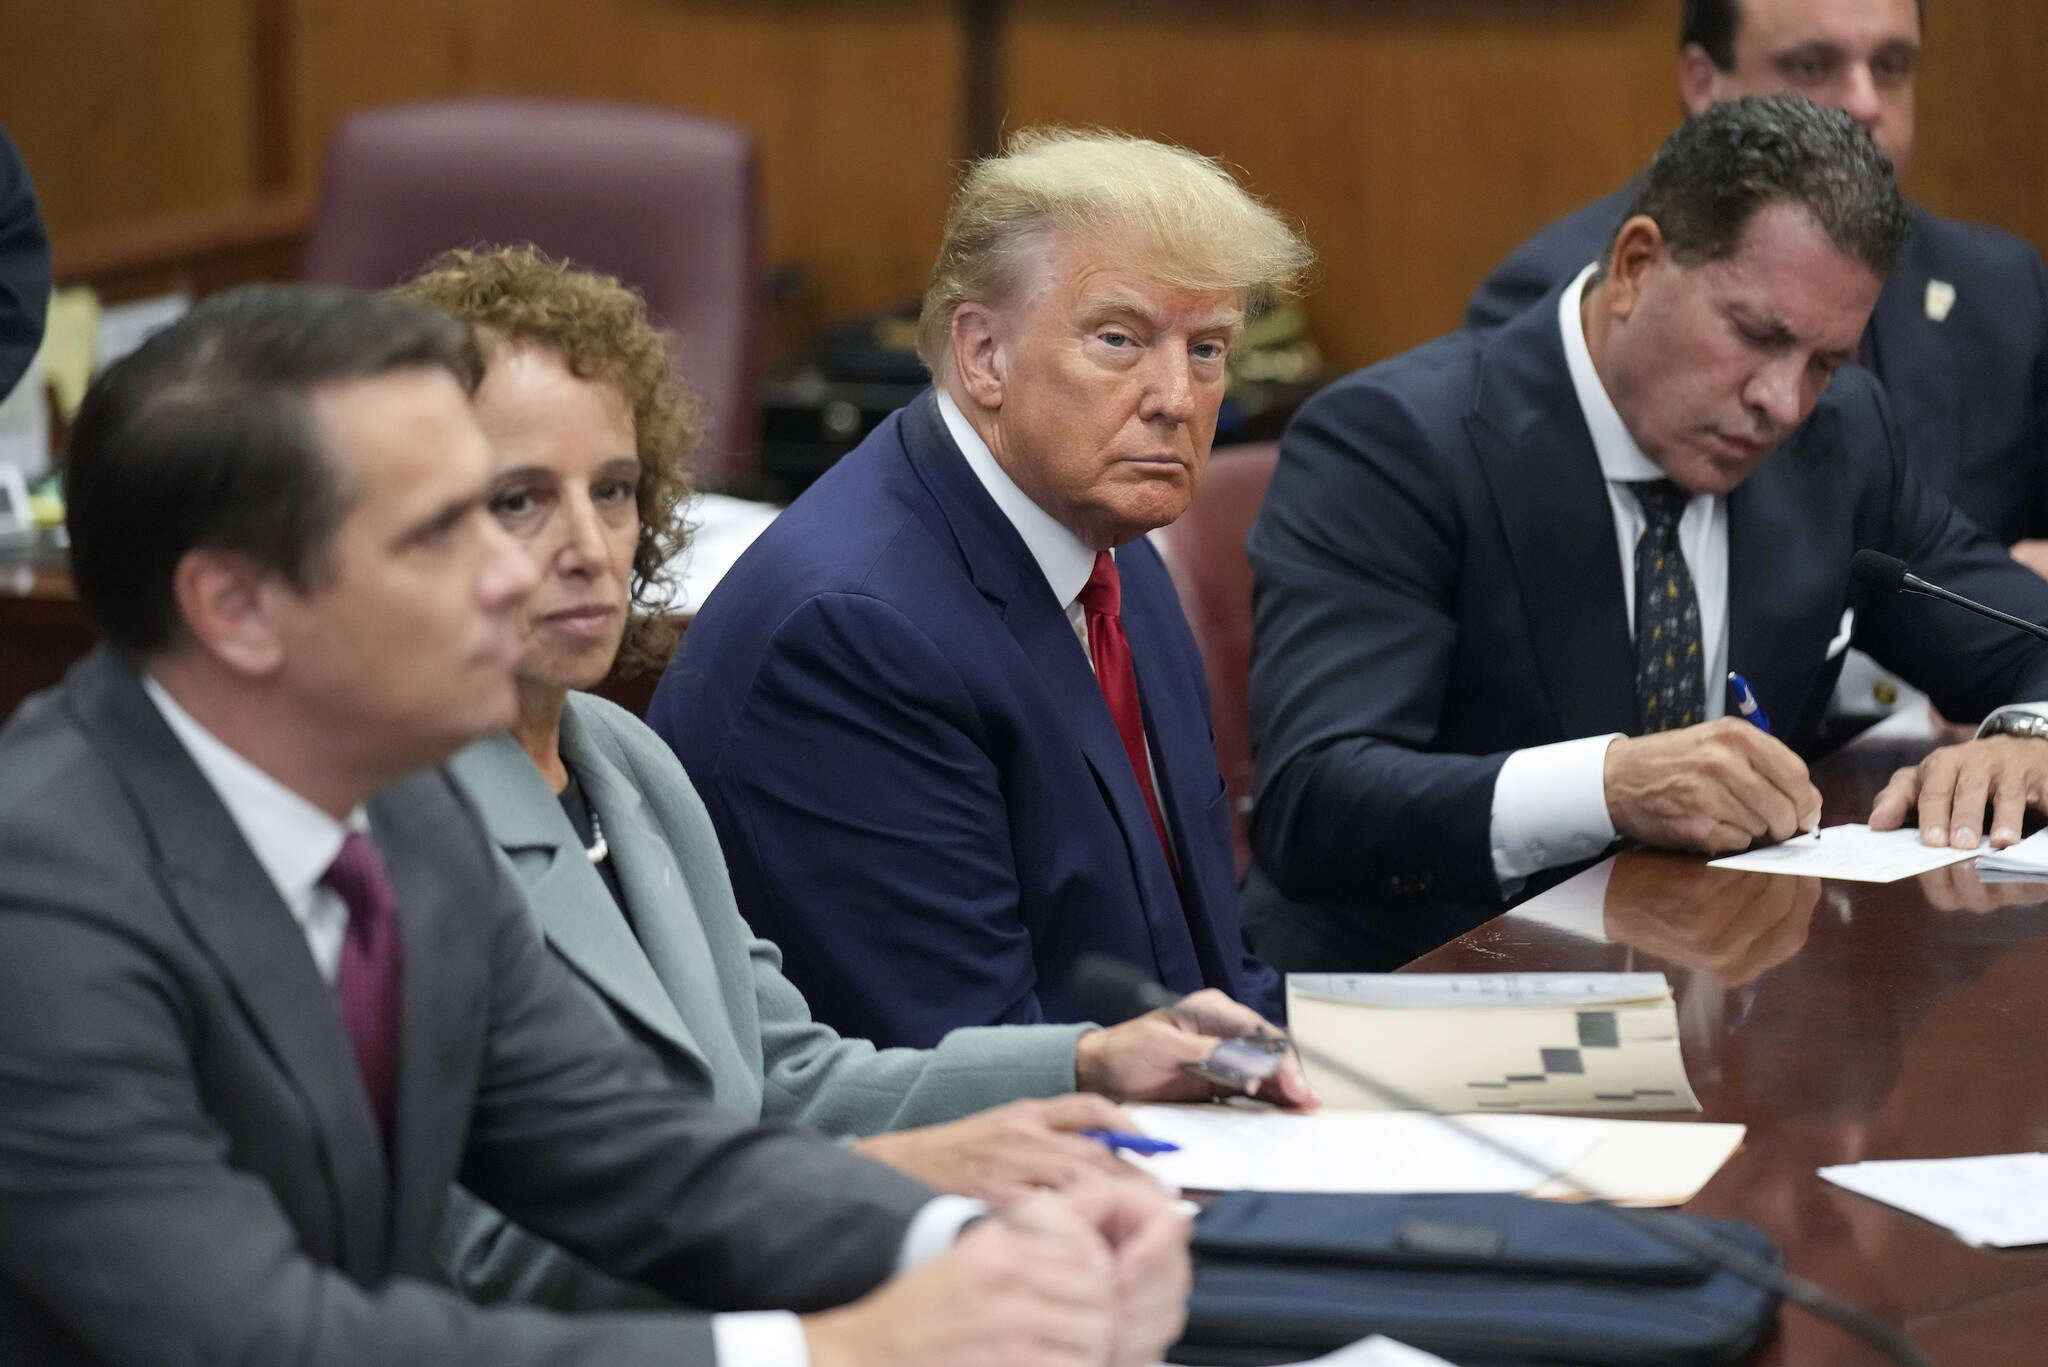 Former President Donald Trump sits at the defense table with his legal team in a Manhattan court, Tuesday, April 4, 2023, in New York. Trump is appearing in court on charges related to falsifying business records in a hush money investigation, the first president ever to be charged with a crime. (AP Photo / Seth Wenig)